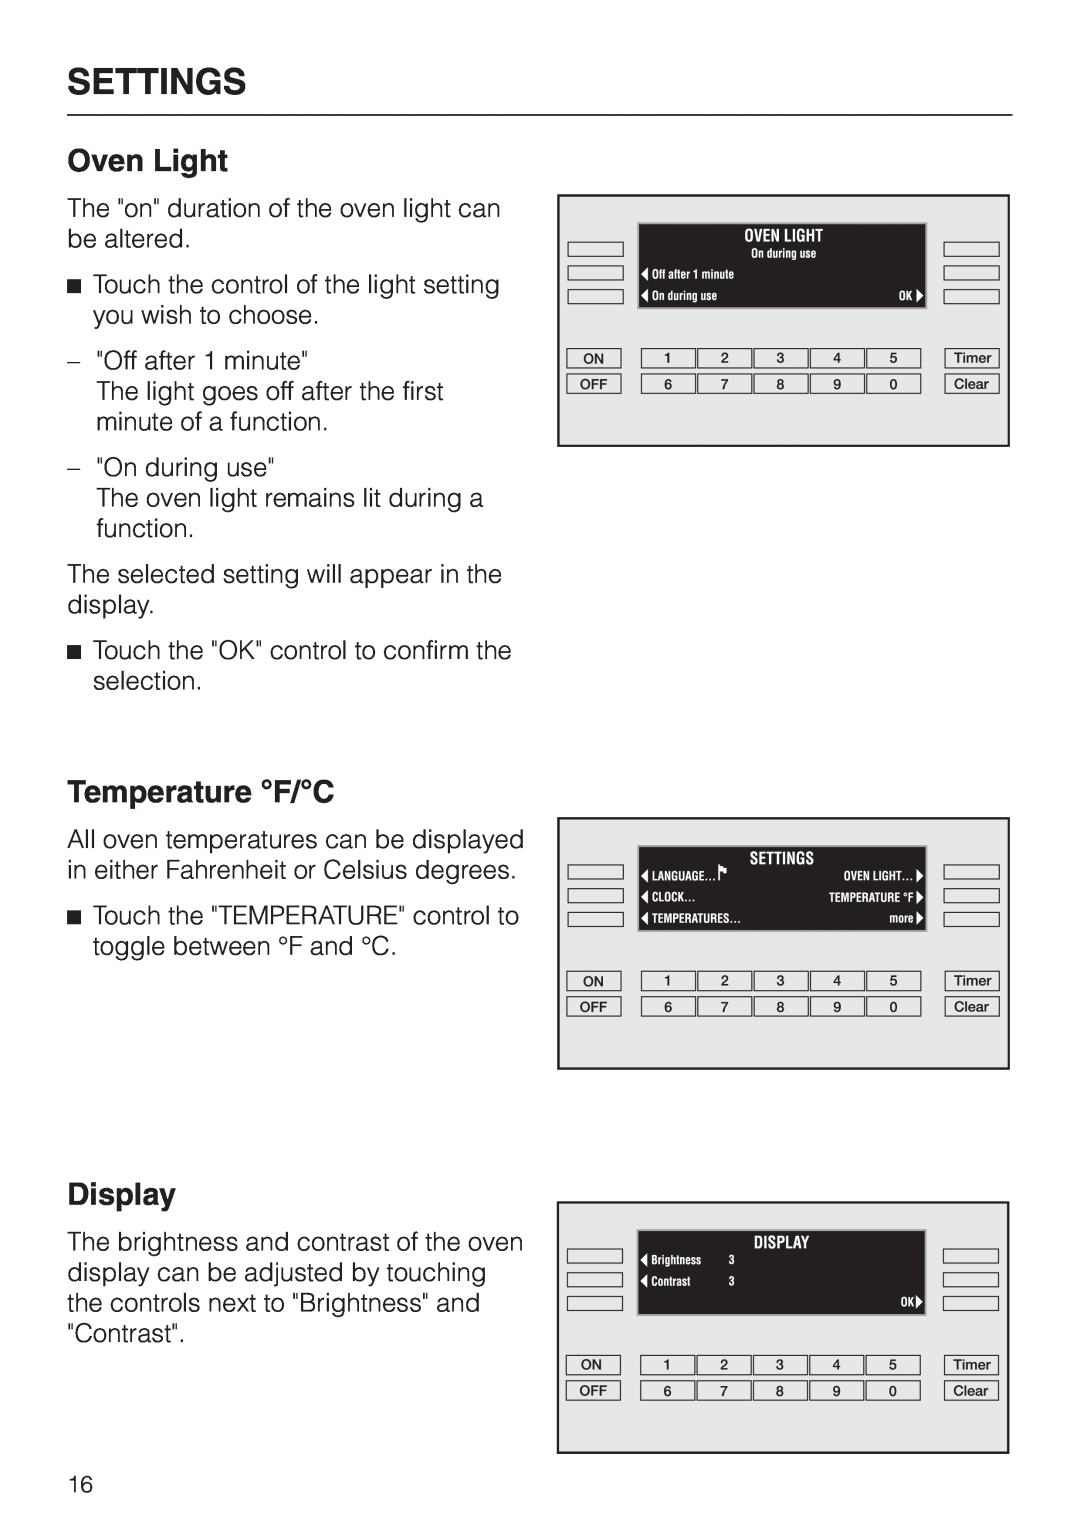 Miele H396B, H395B operating instructions Oven Light, Temperature F/C, Display, Settings 